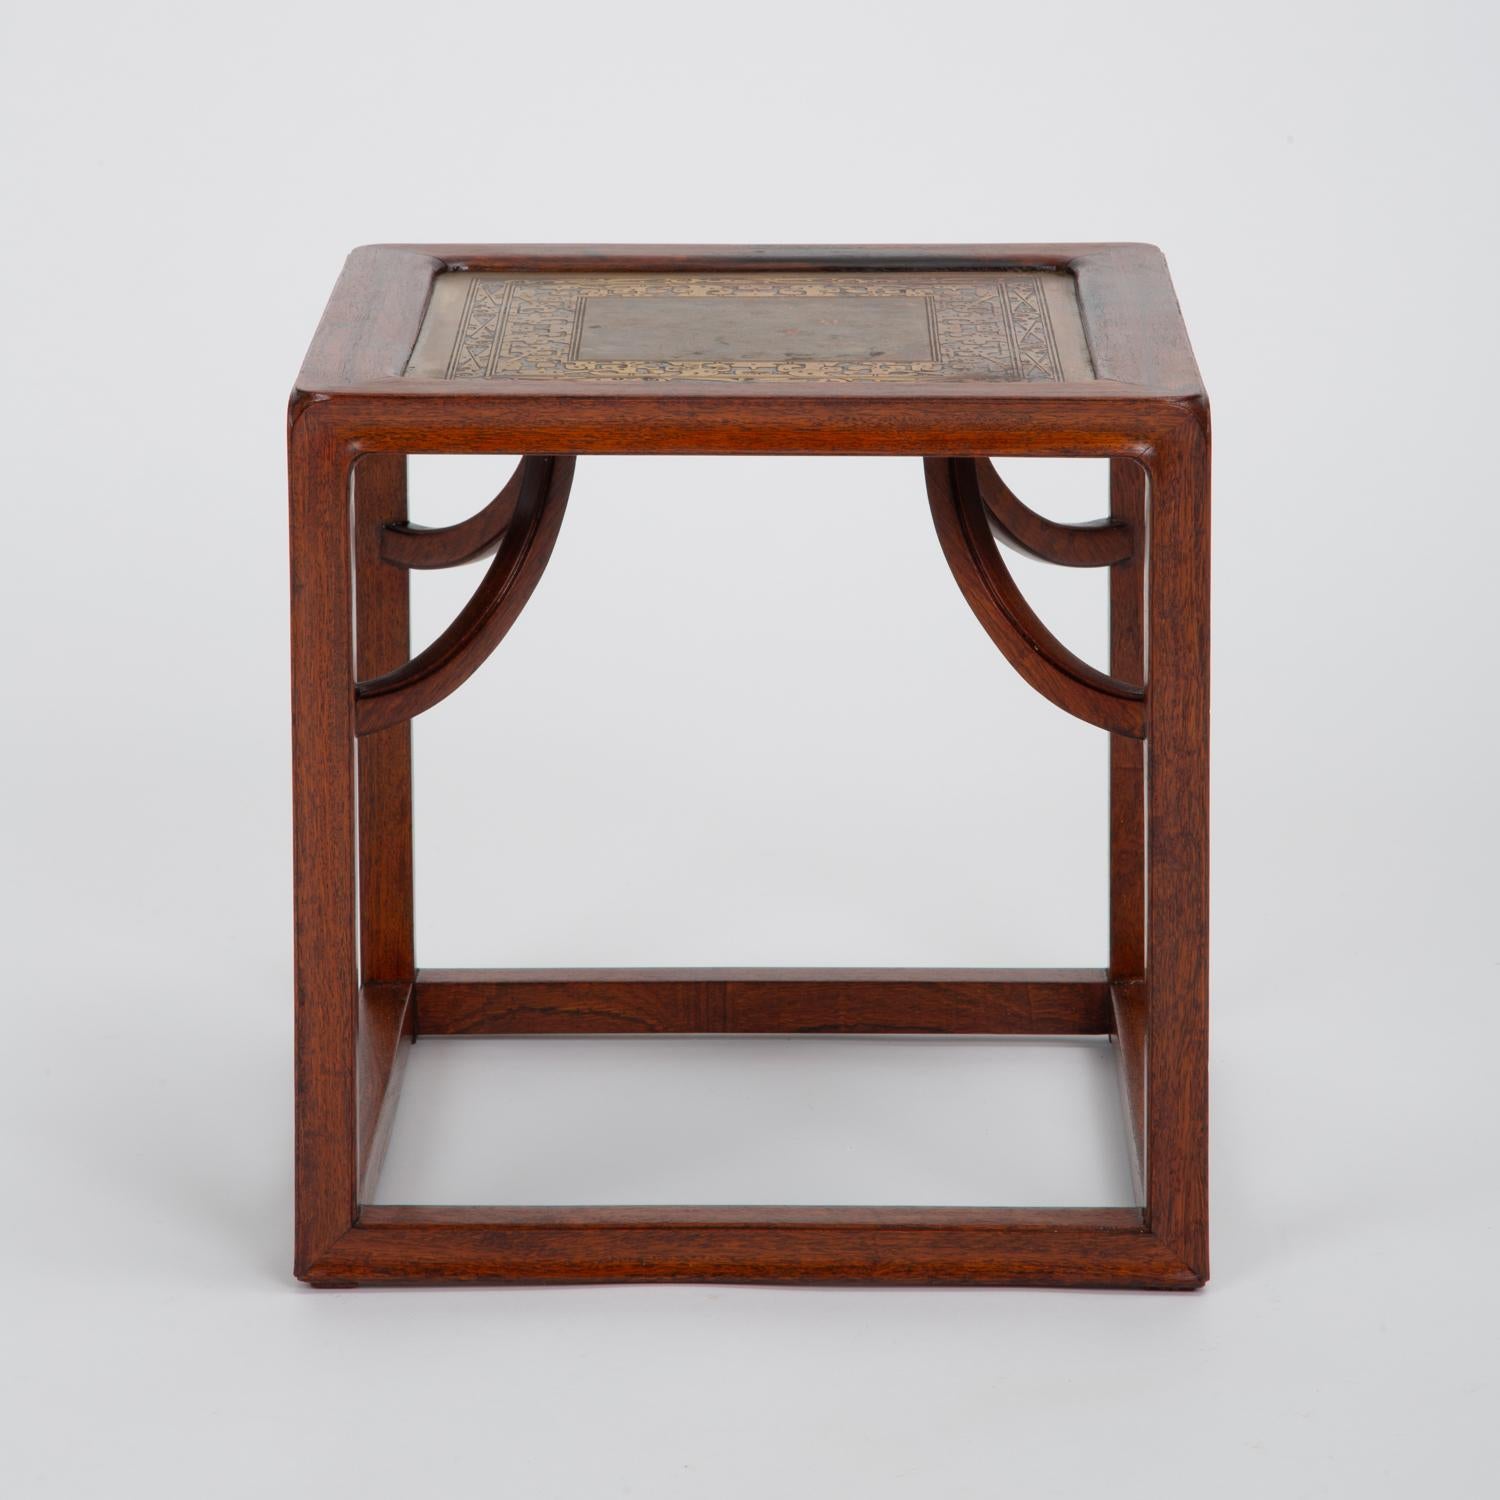 A cubic side table in rosewood and etched brass with subtle decorative motifs. Straddling modern and Arts & Crafts traditions, this square table has rounded edges and a layered construction with notched corners rounded edges. The frame is solid